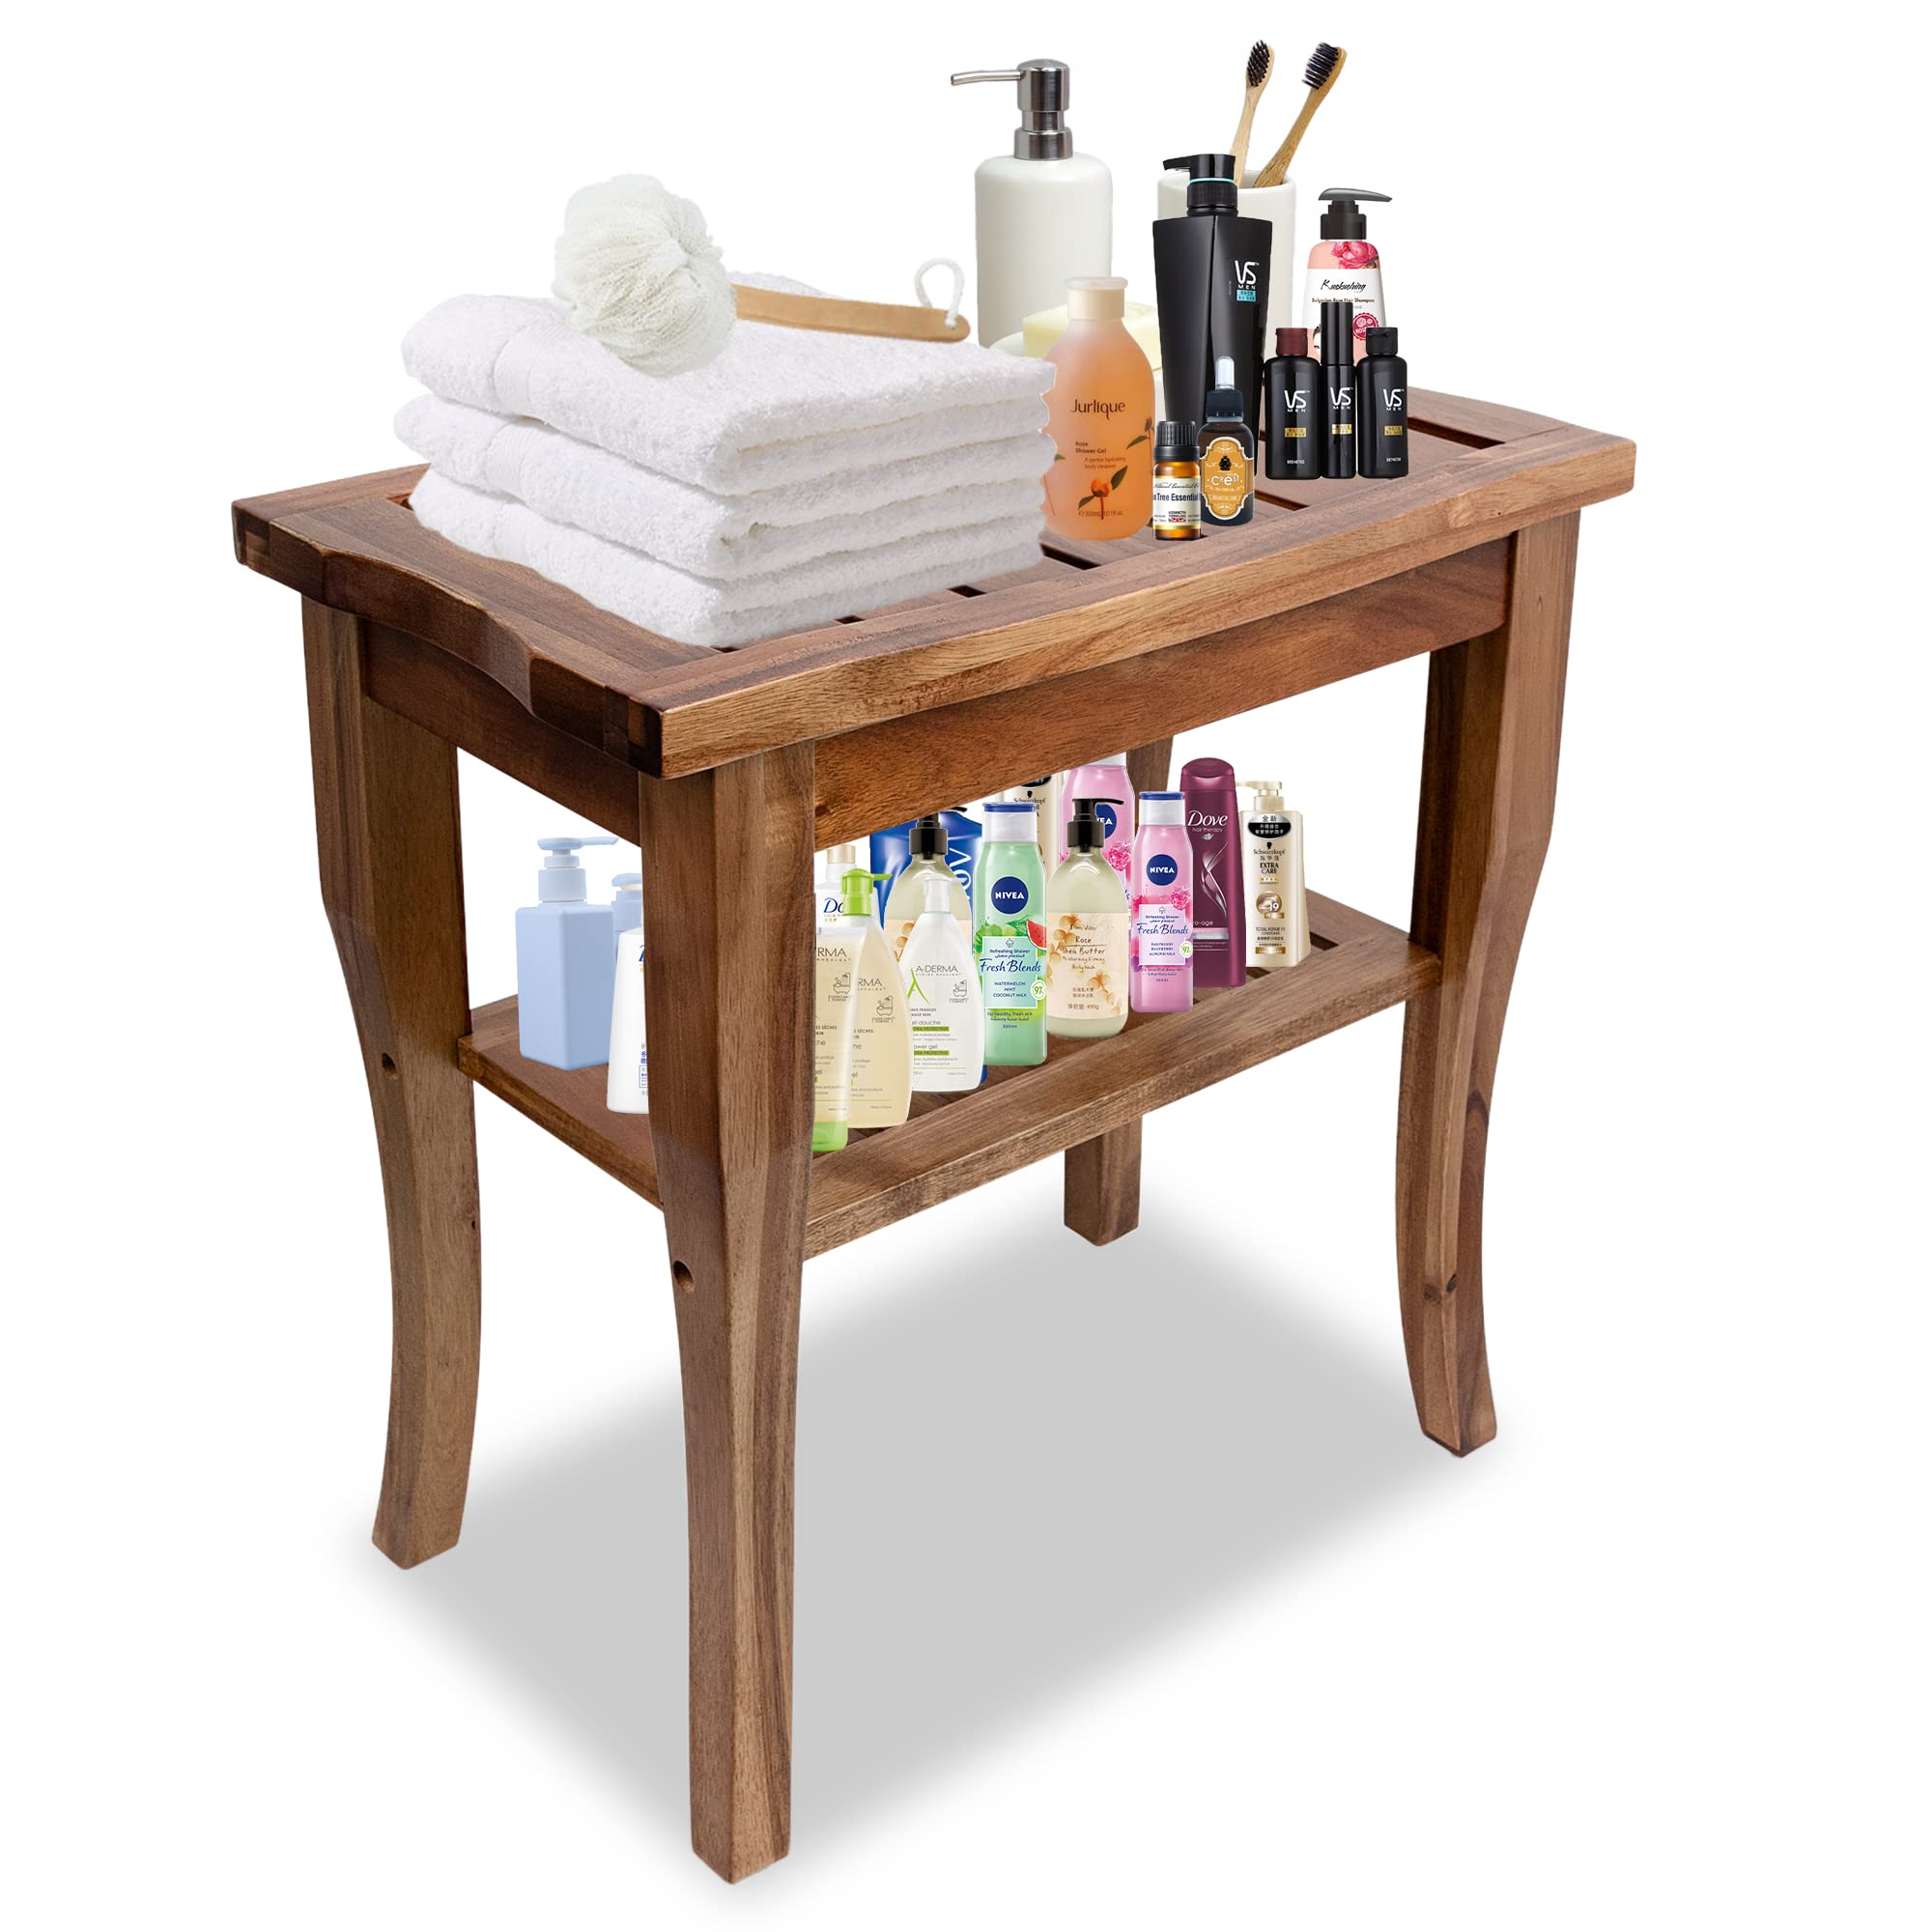 Slimry Design Teak Shower Bench - Solid and Water -Resistant Teak Bench with Storage Shelf Easy to Use Bath Stool with Non-Slip Pads -Assembly Required (Small)